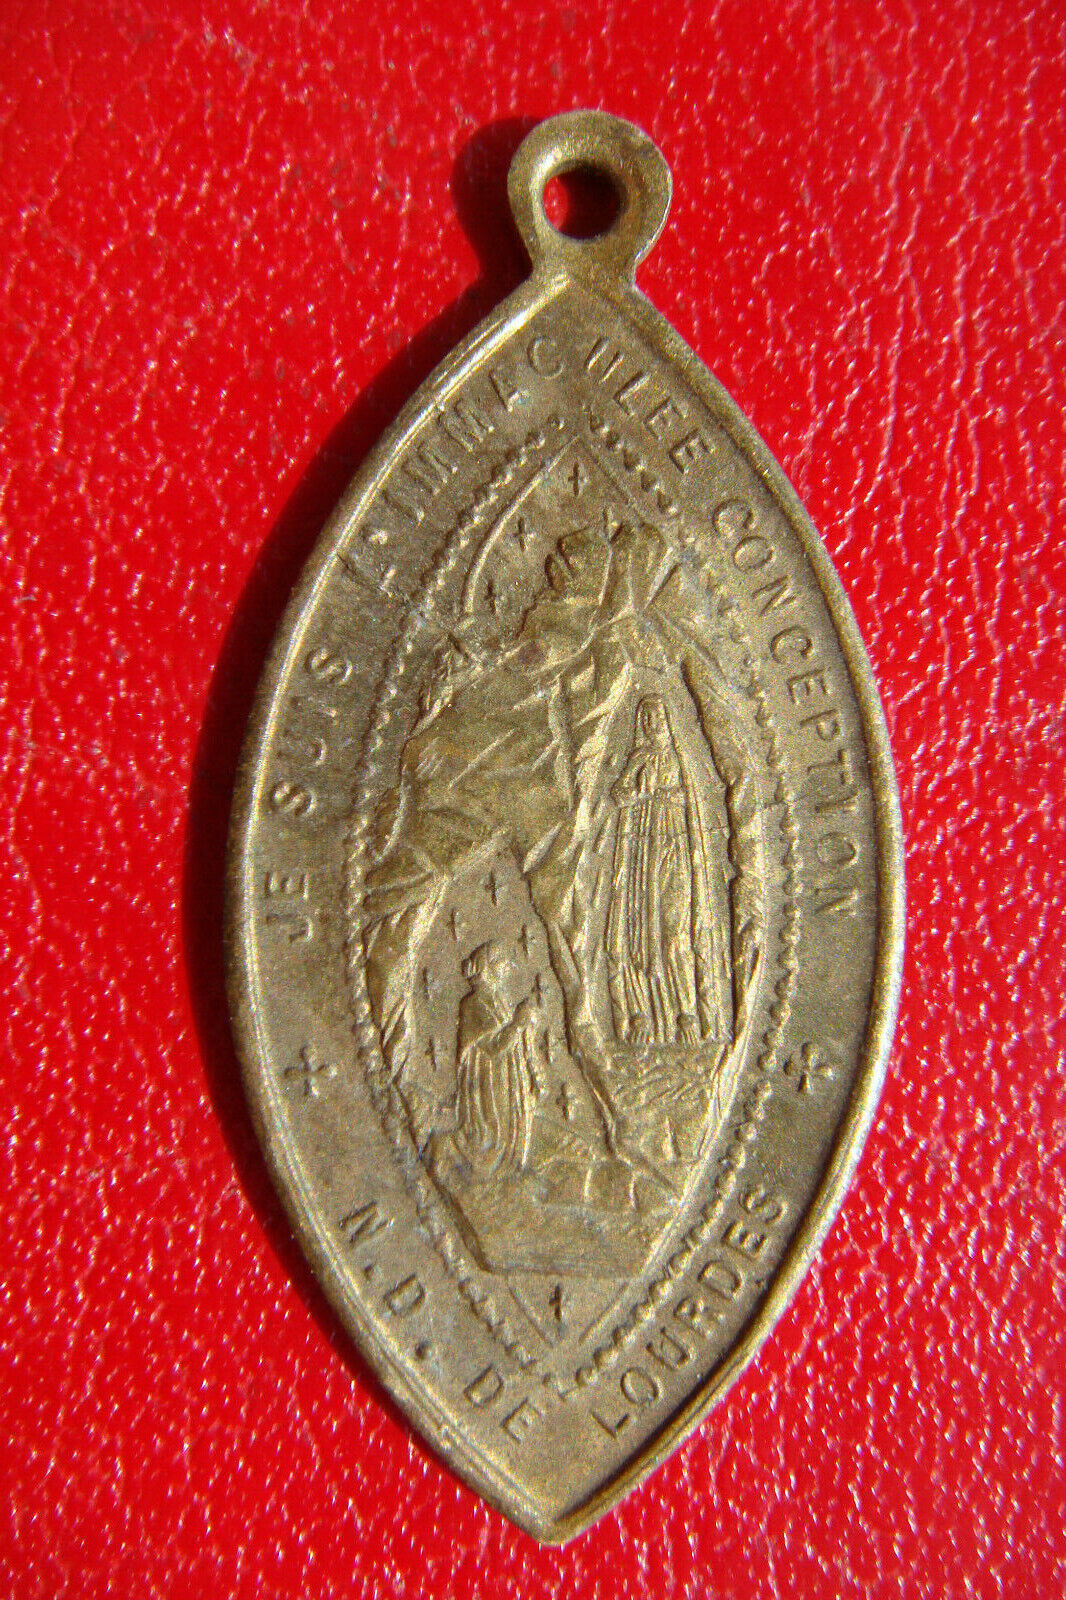 CHURCH OF OUR LADY OF LOURDES IMMACULATE CONCEPTION OLD VINTAGE FRENCH MEDAL